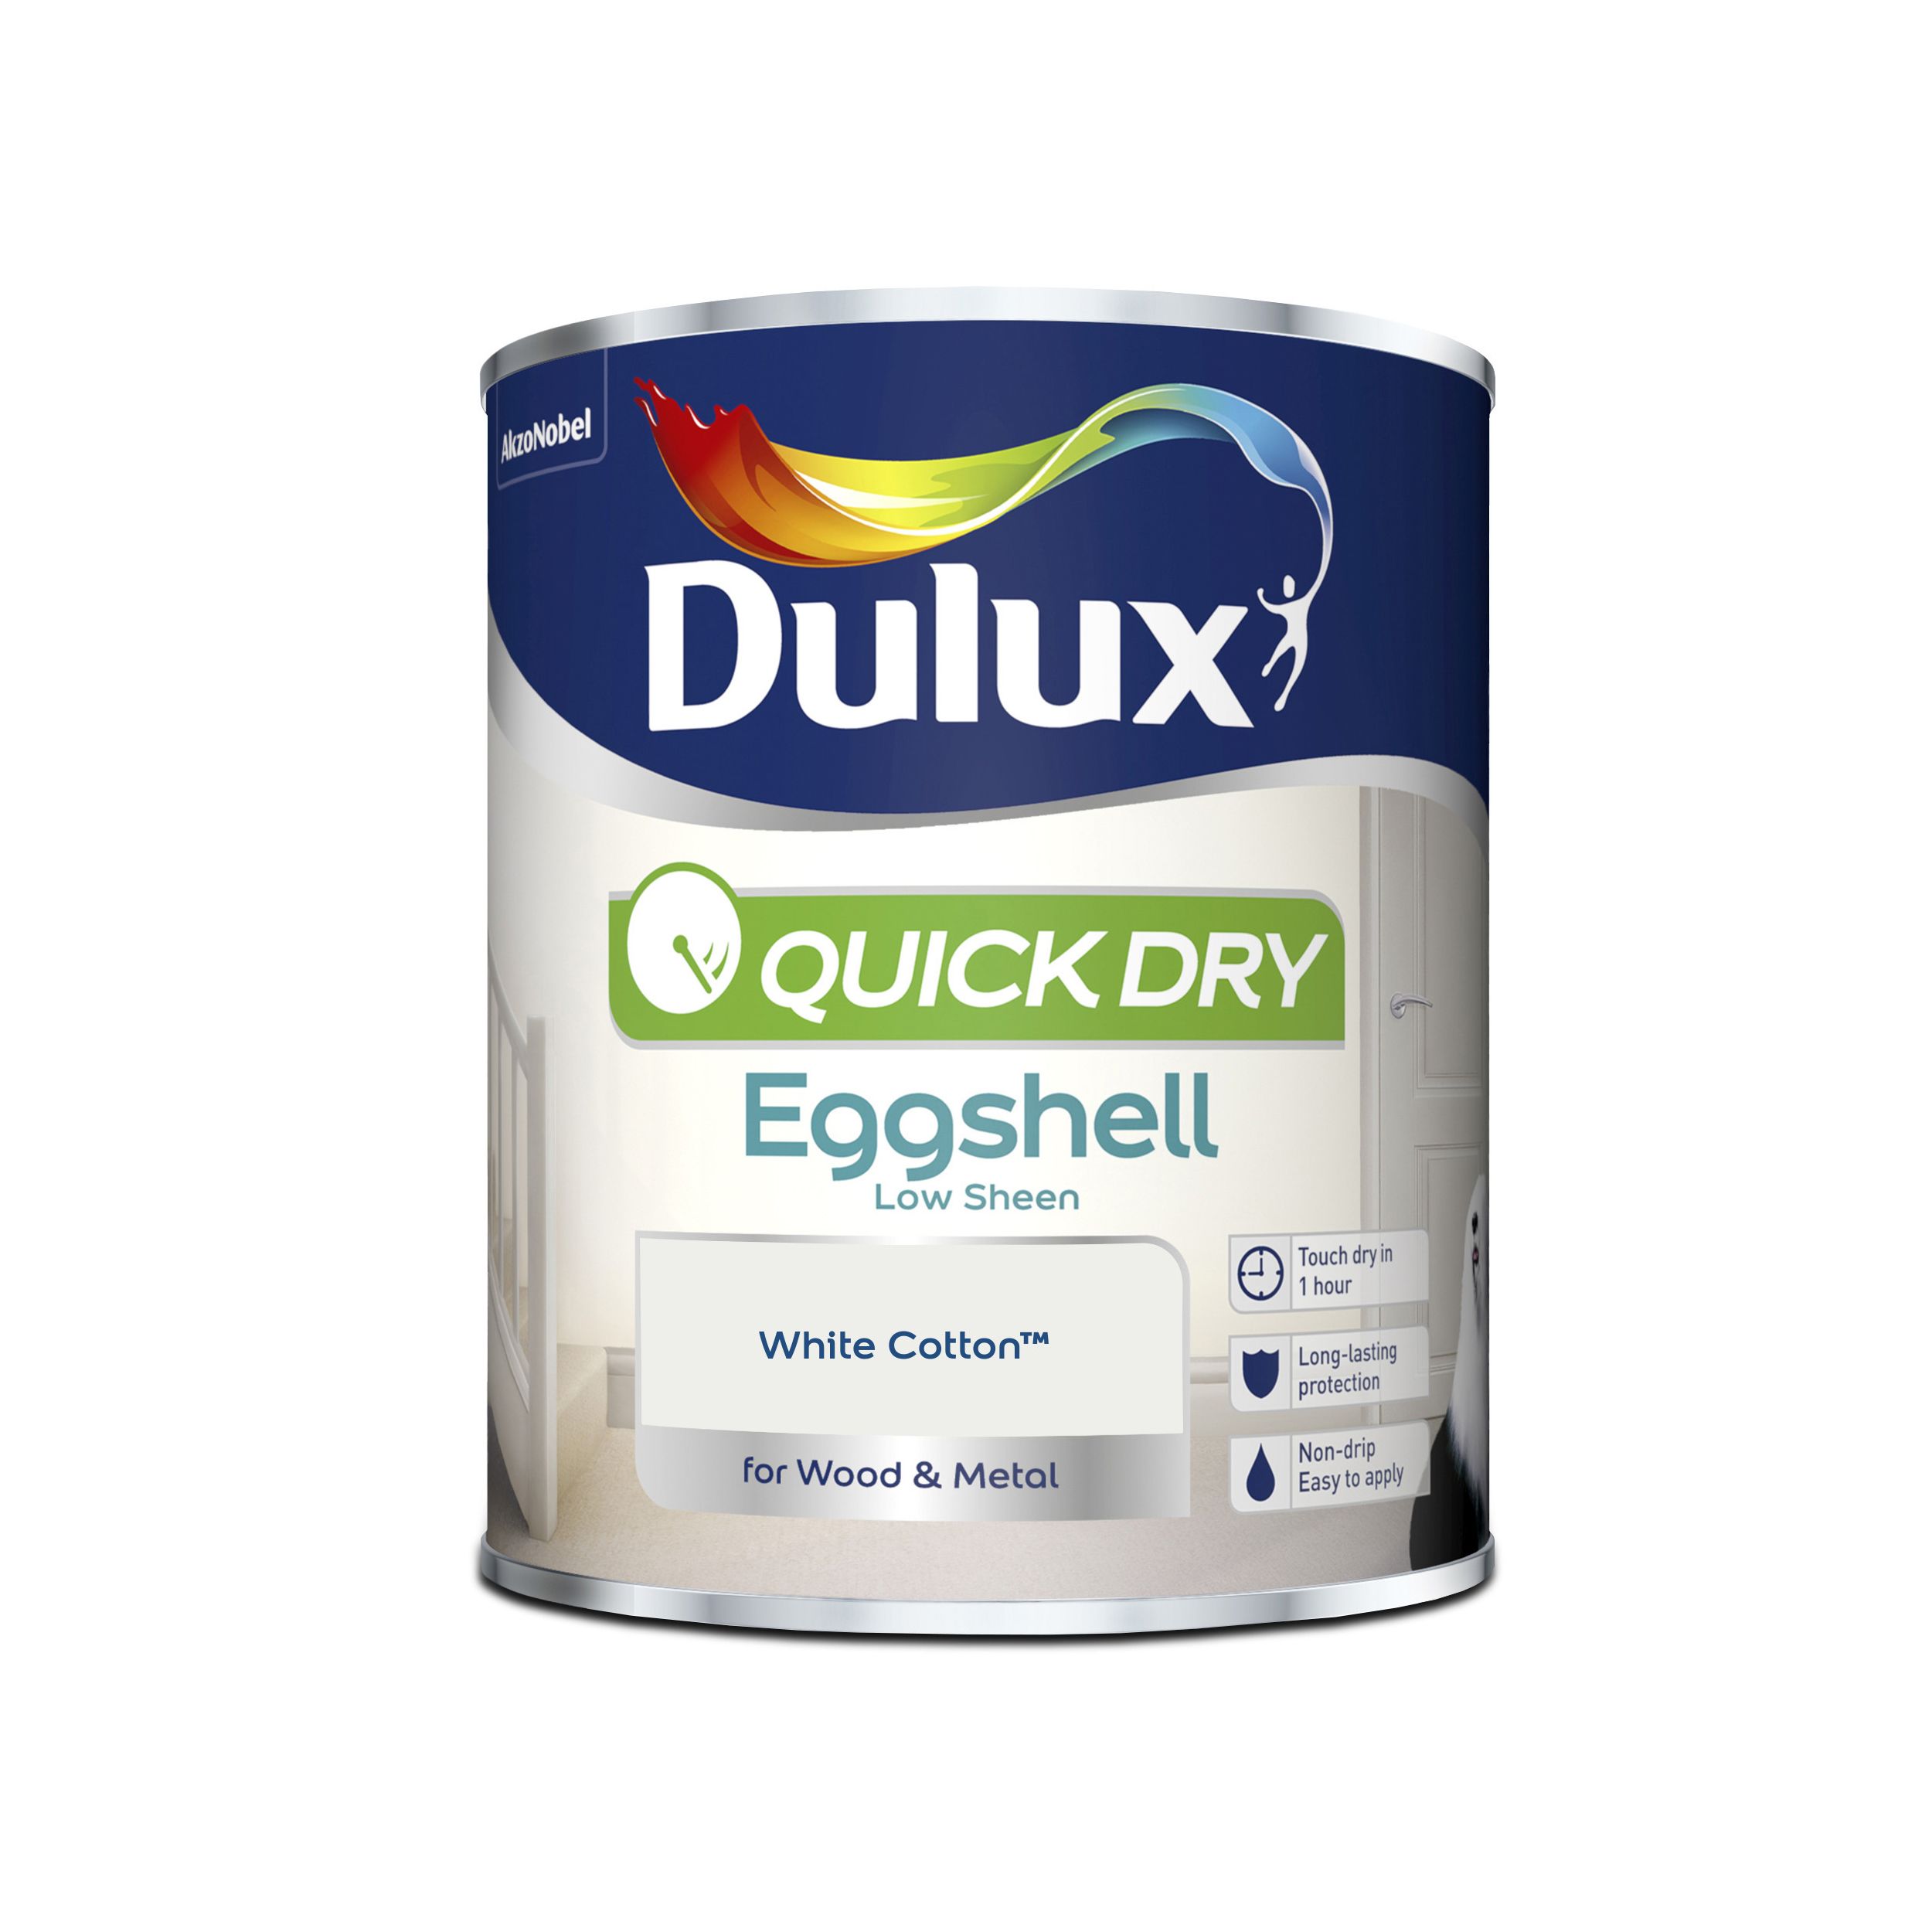 Dulux Quick dry White cotton Eggshell Metal & wood paint, 750ml